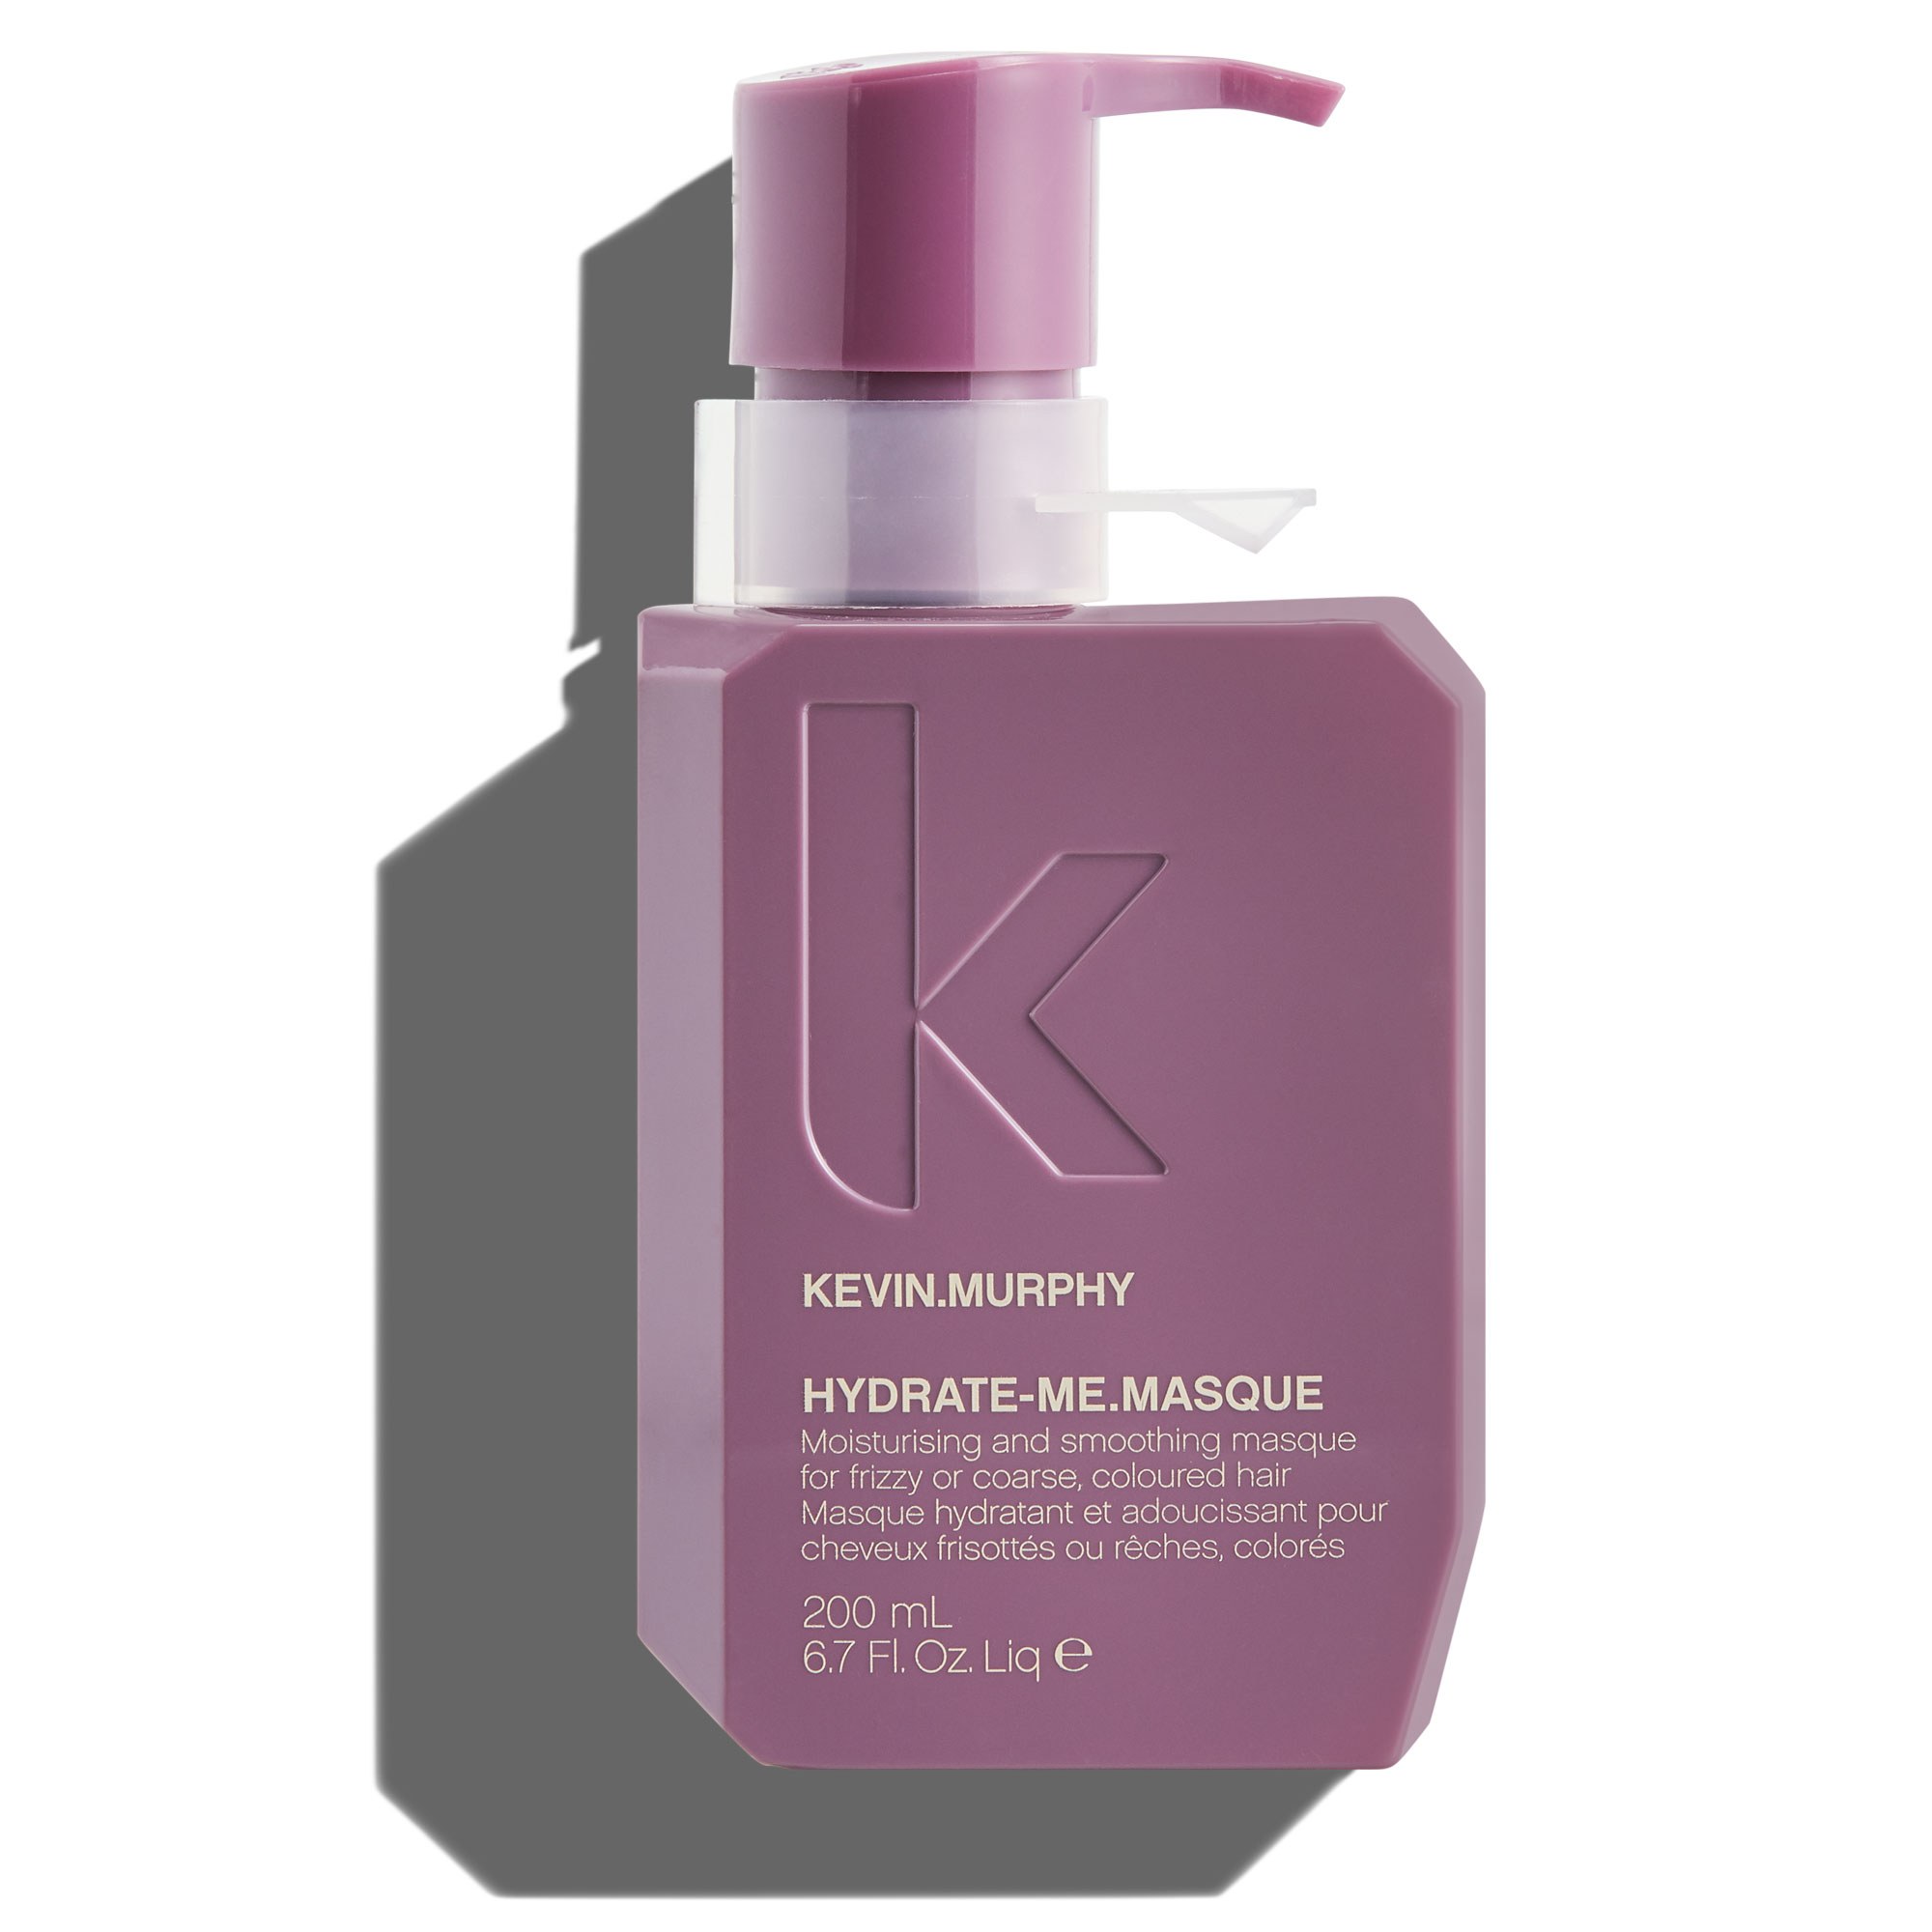 KEVIN.MURPHY HYDRATE-ME.MASQUE 6.7ml